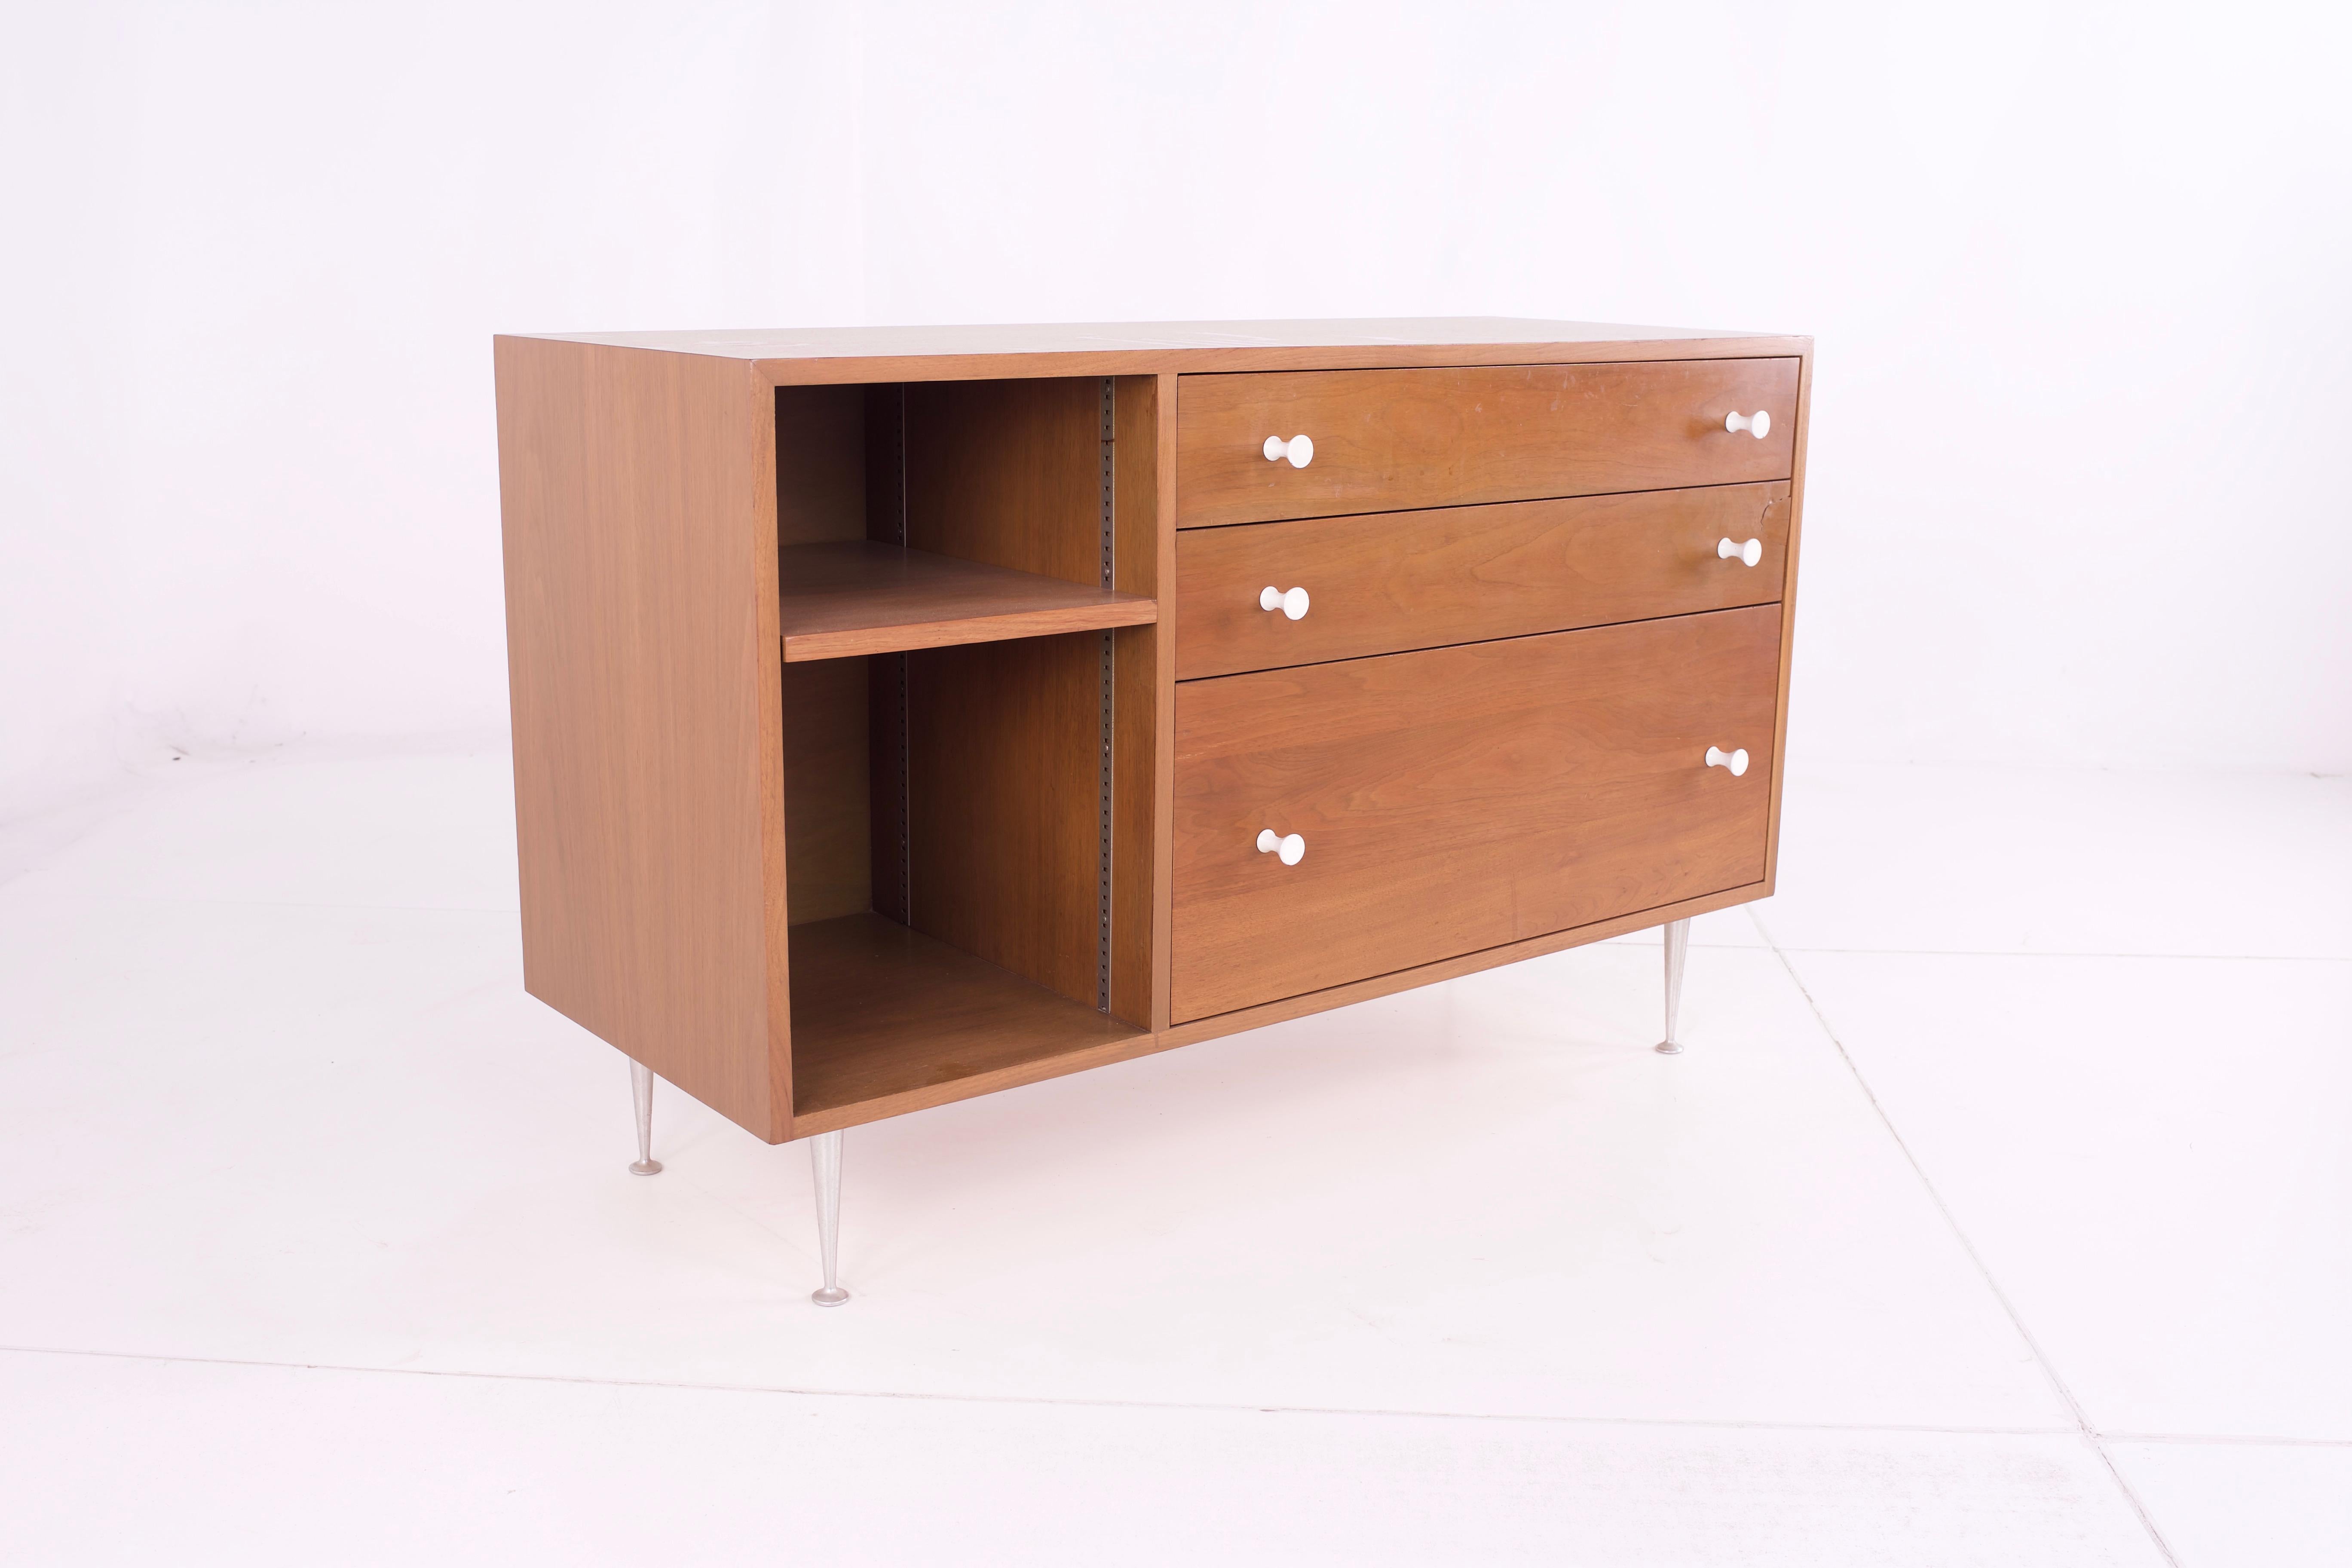 George Nelson for Herman Miller Mid Century sideboard credenza media cabinet
Measures: 48 wide x 18.5 deep x 30.5 high
See below for 5 ways to save!
Free restoration: When you purchase a piece we carefully clean and prepare it for shipping. If